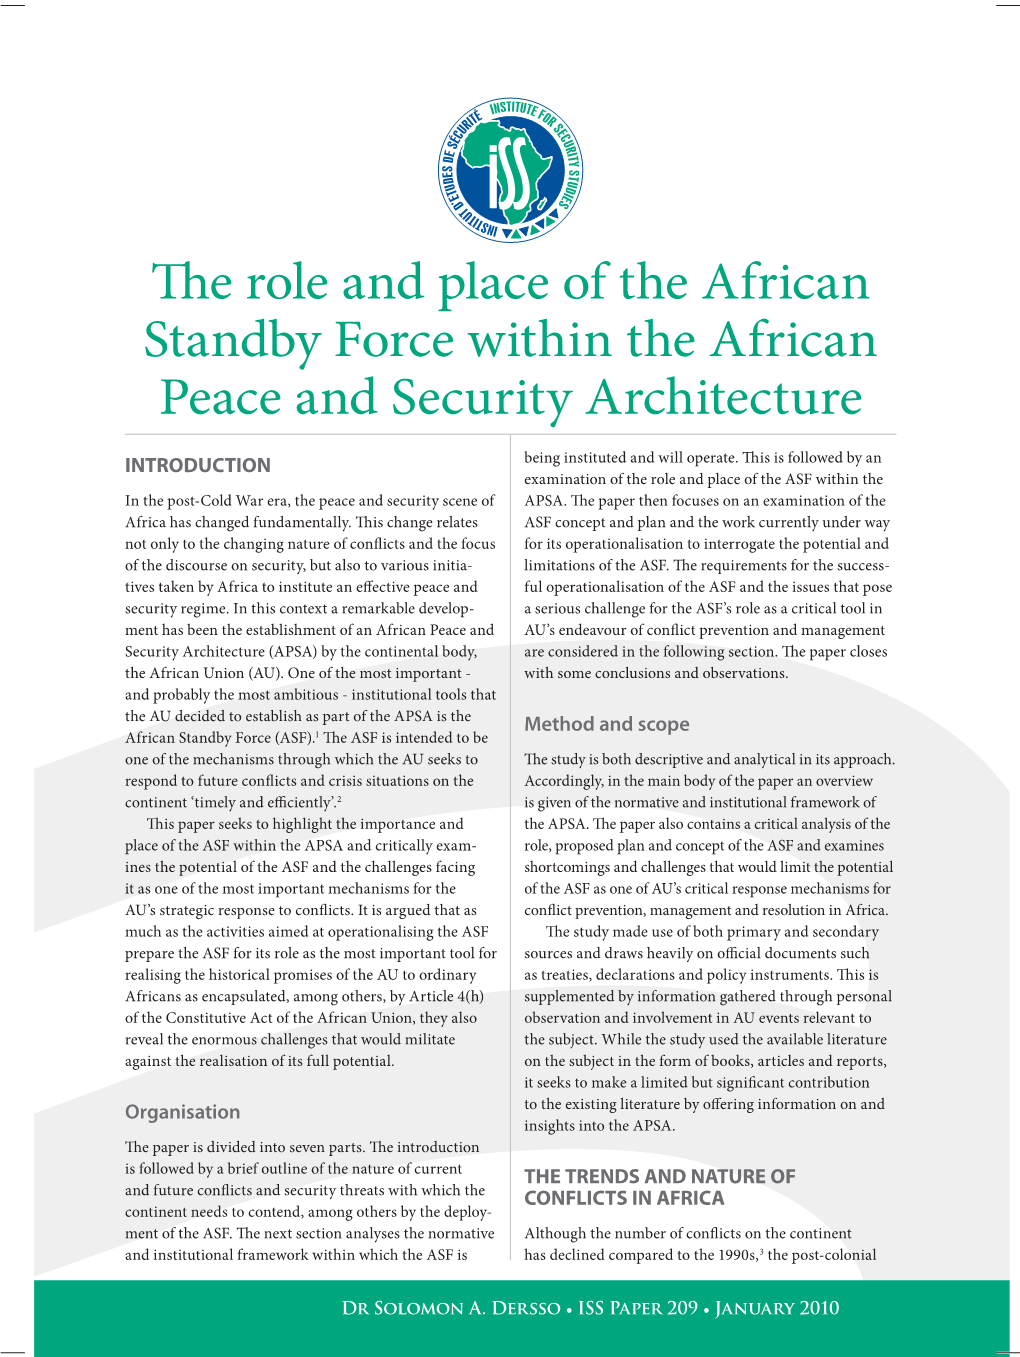 The Role and Place of the African Standby Force Within the African